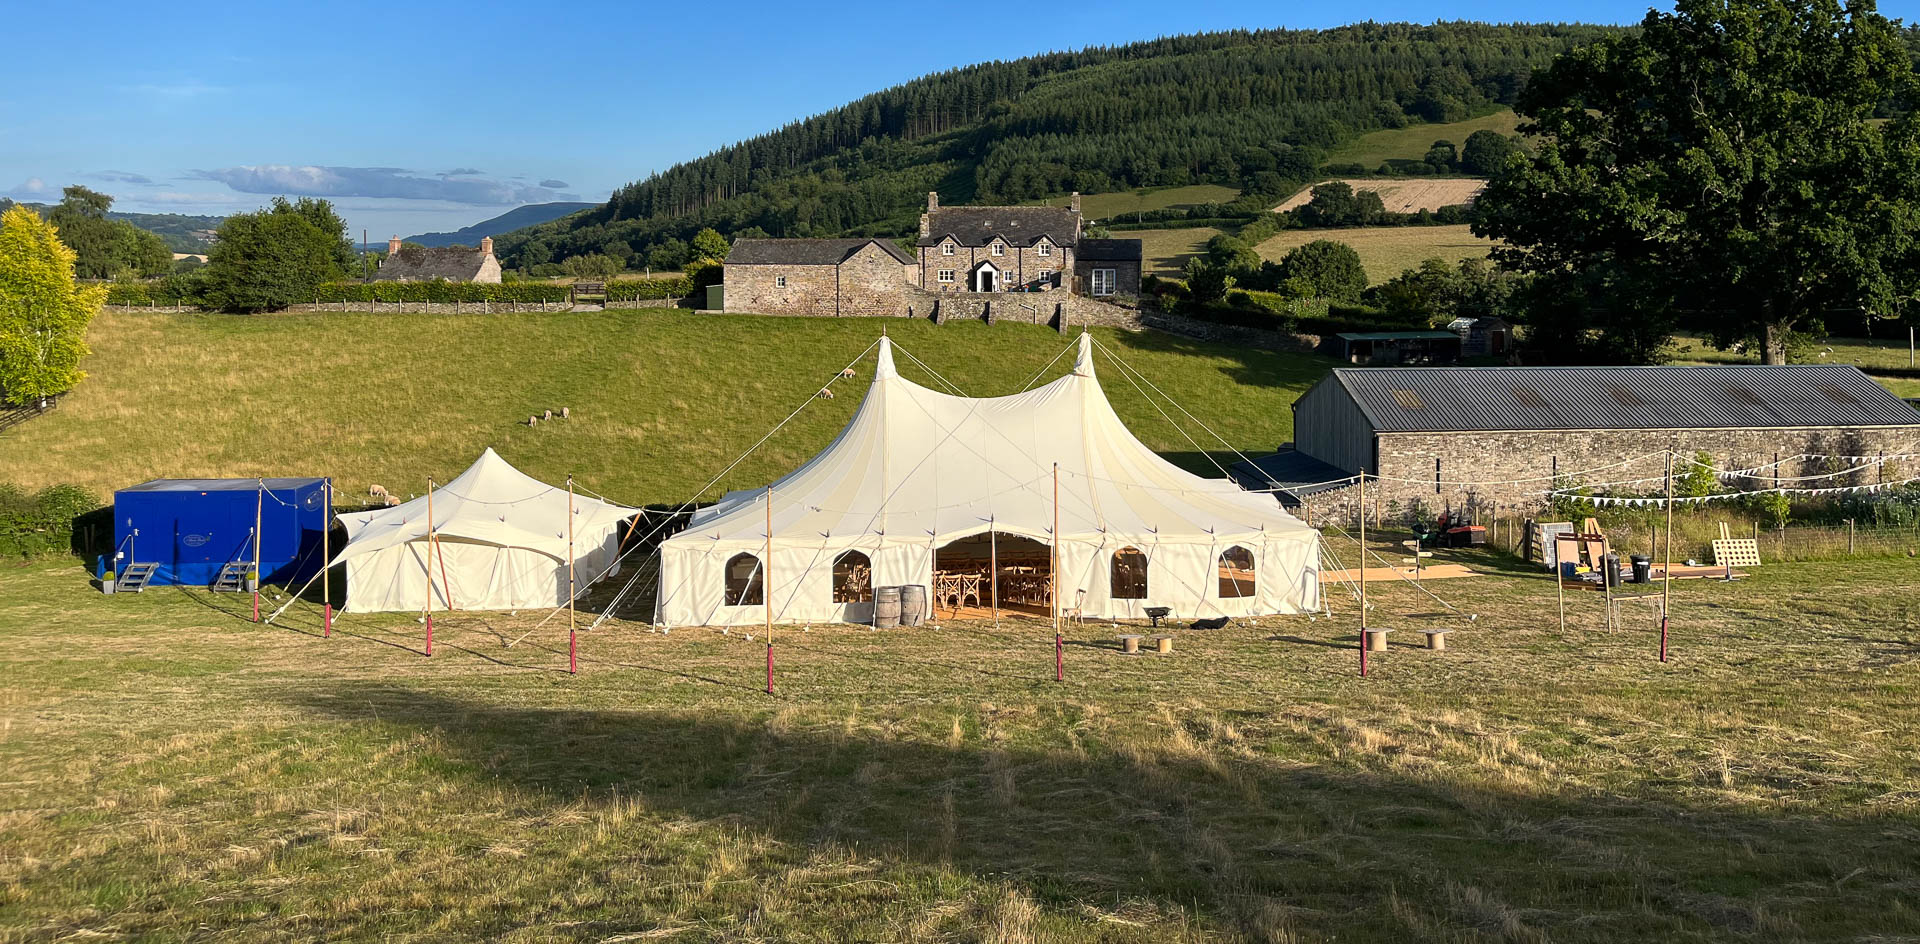 Farm marquee wedding in wales - canvas marquee hire